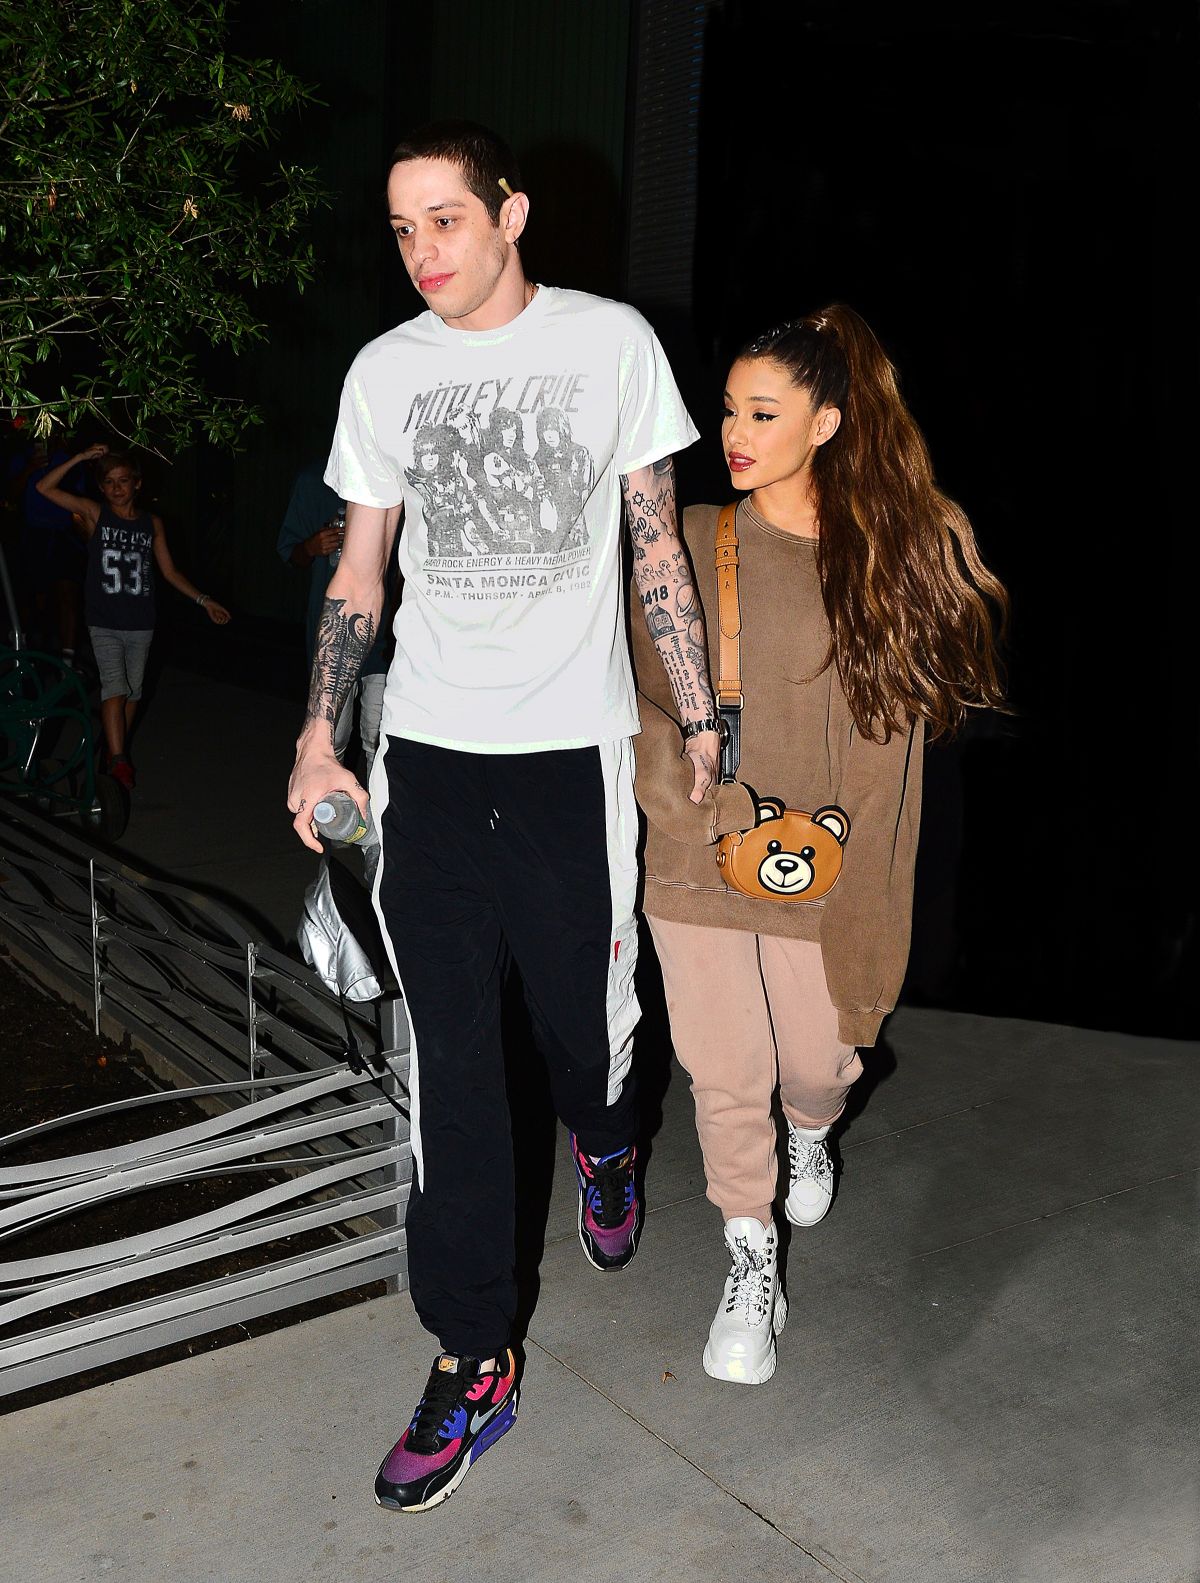 Ariana Grande With Pete Davidson In Brooklyn August 27, 2018 – Star Style